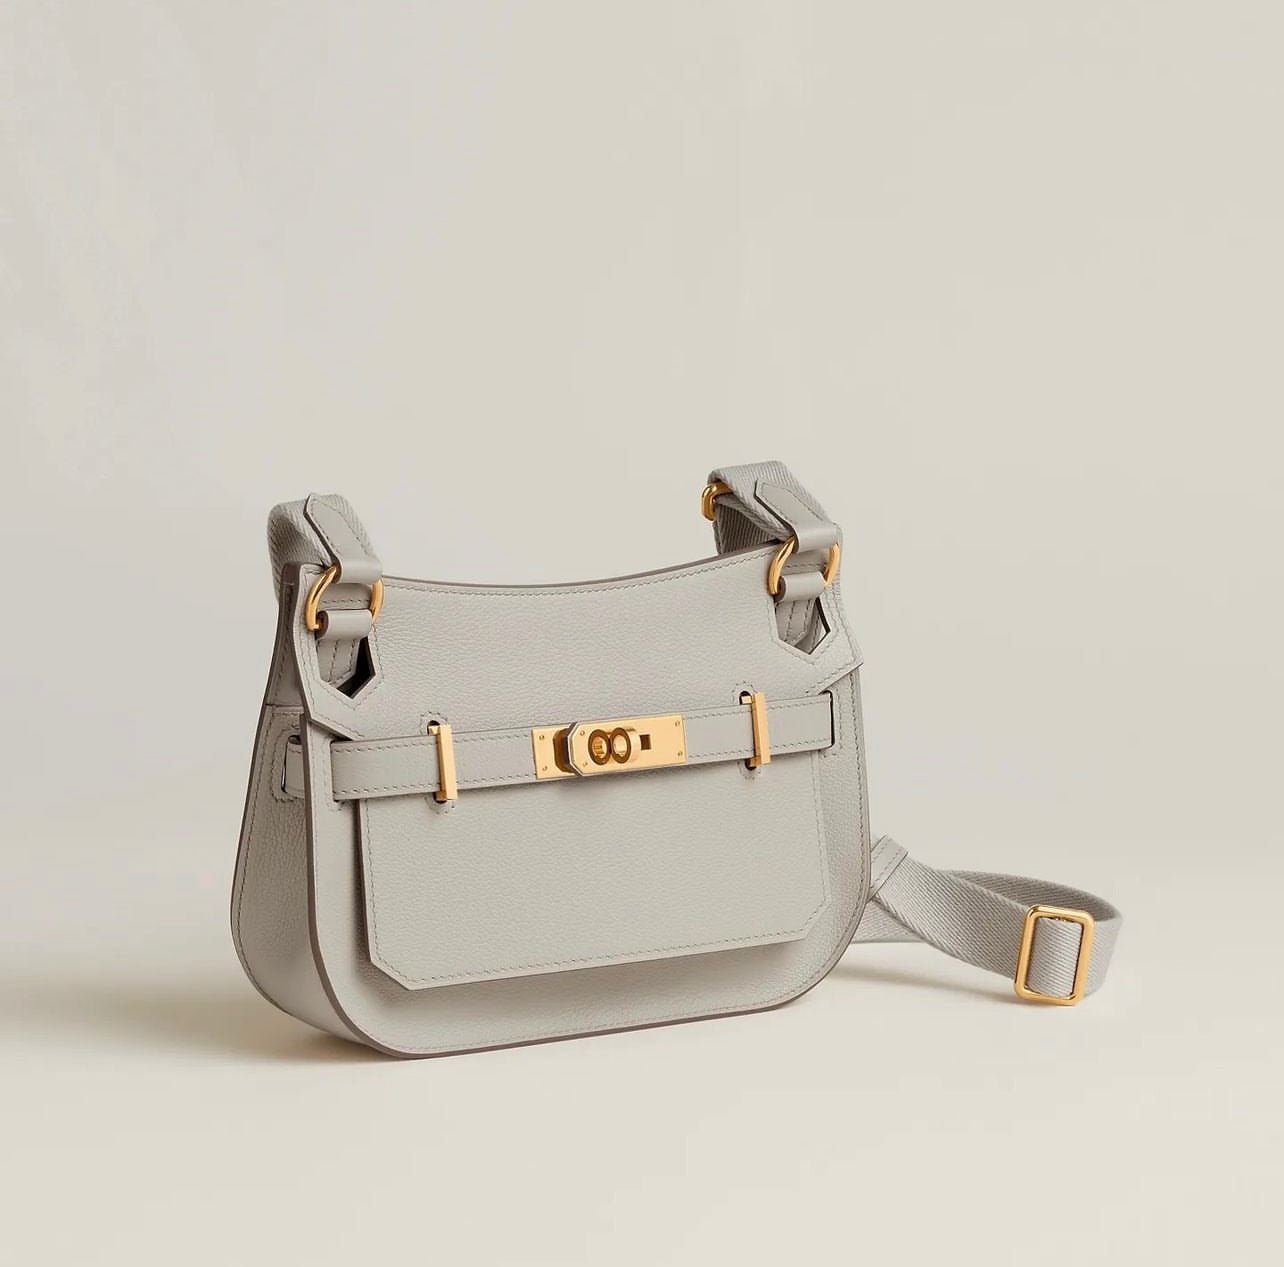 Hermès is releasing mini Jypsiere in their FW2022 collection and